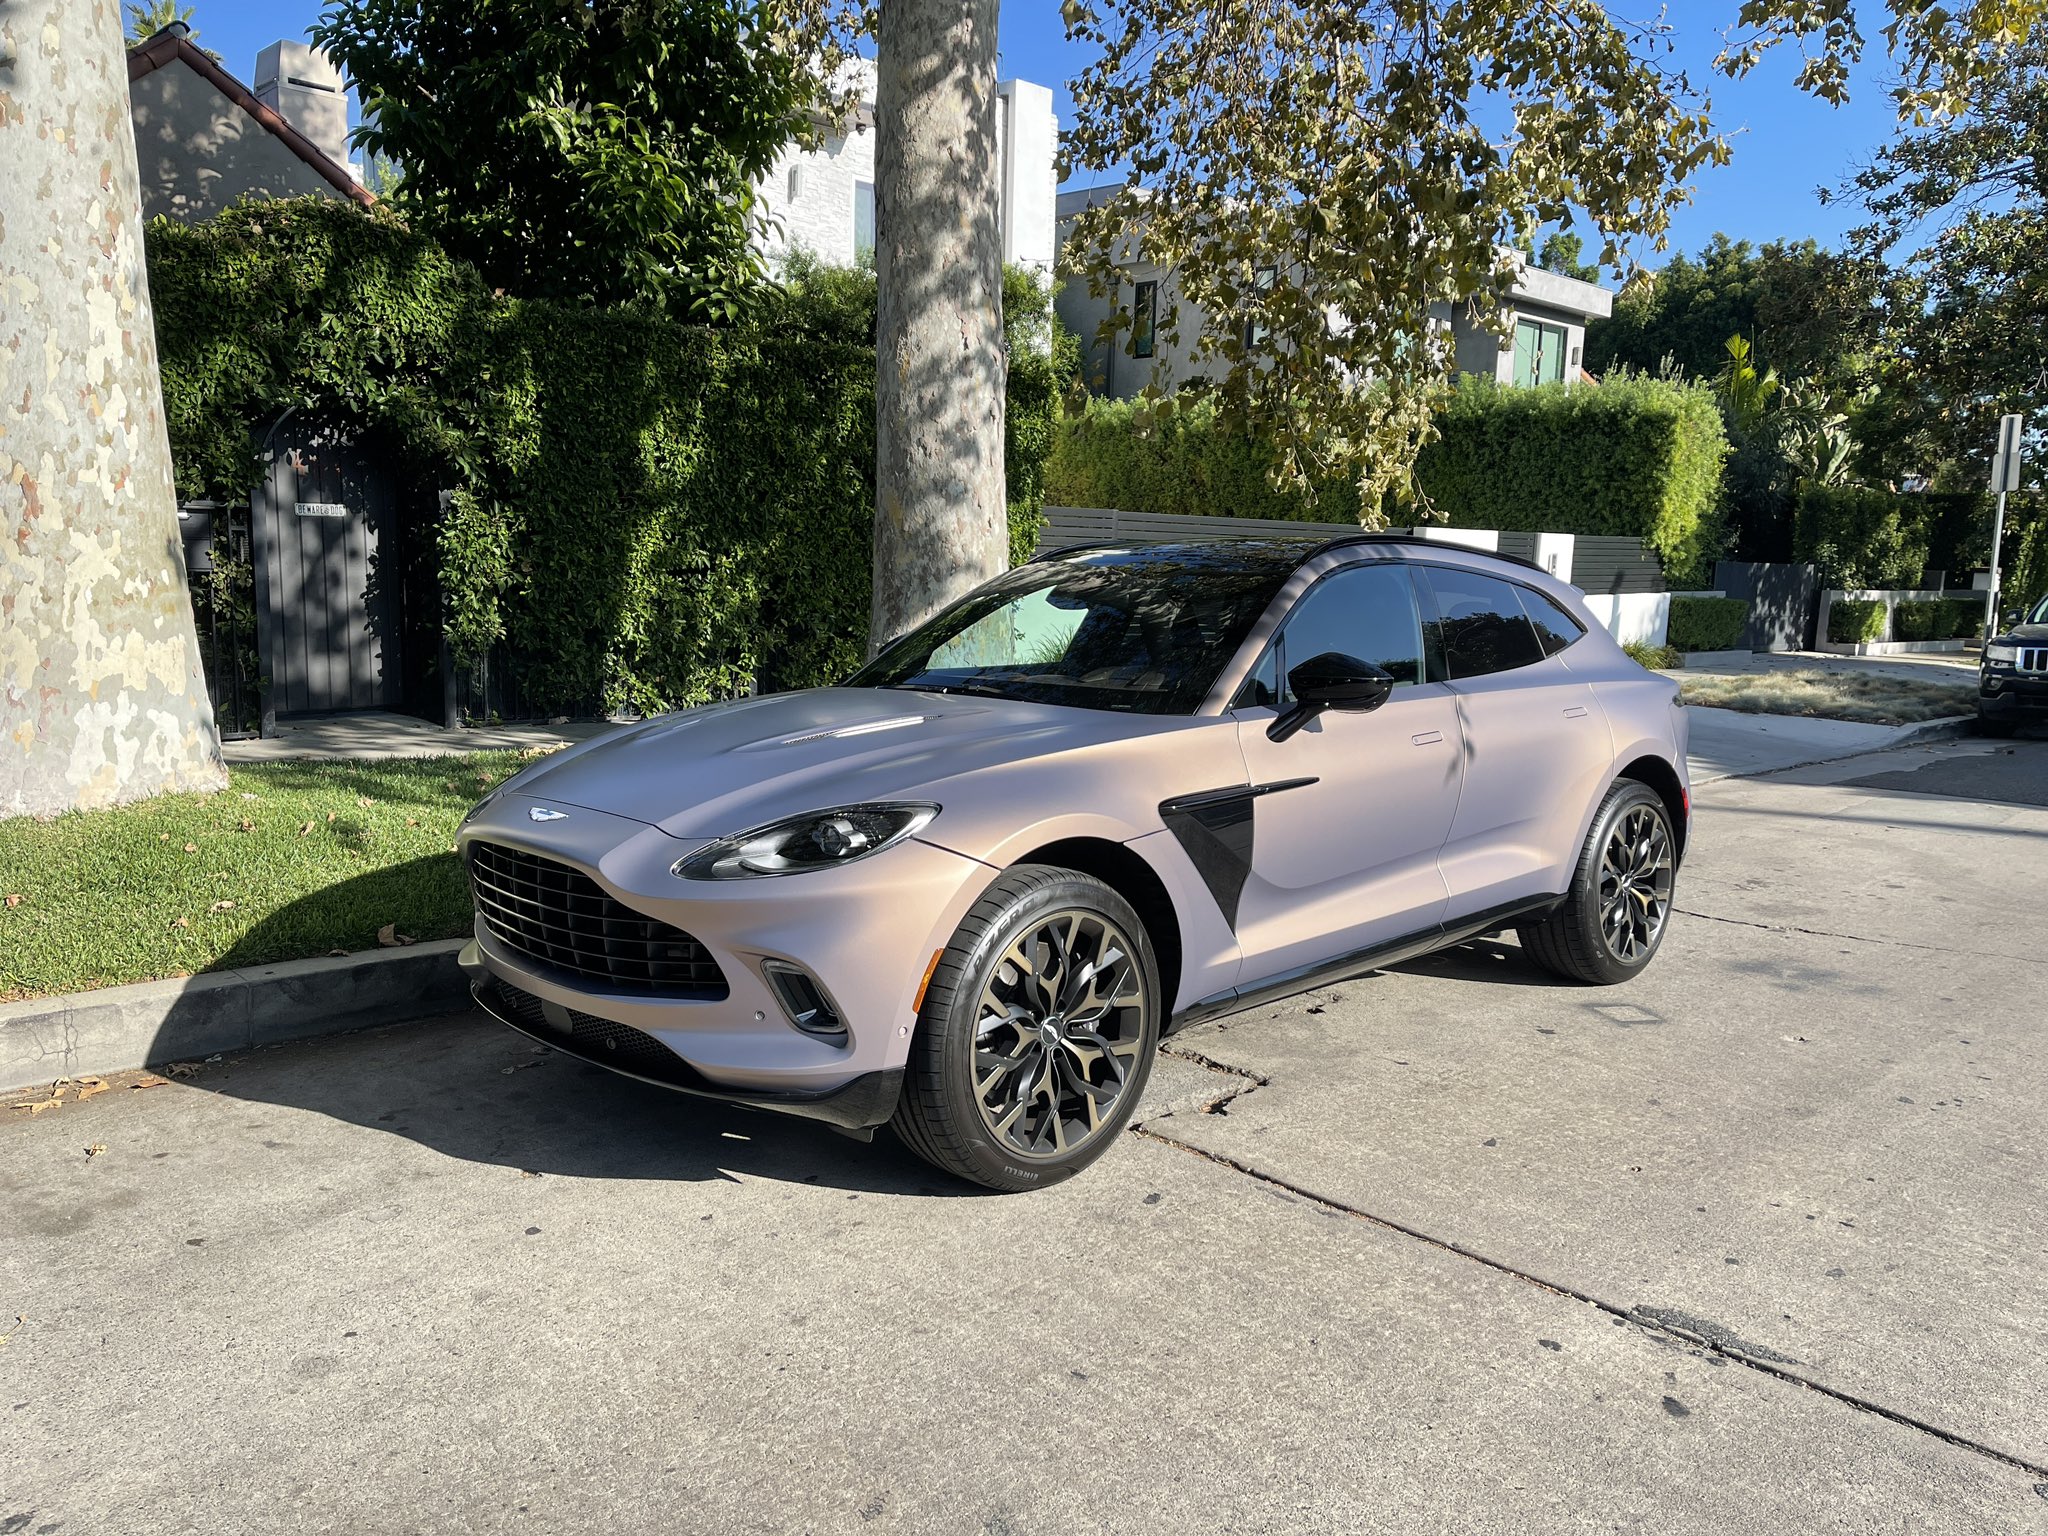 Daniel Golson on Twitter: "I think I have ever a press car more suitably spec'd for me than this @astonmartin DBX. combo of Satin Solar Bronze paint, gold wheels,